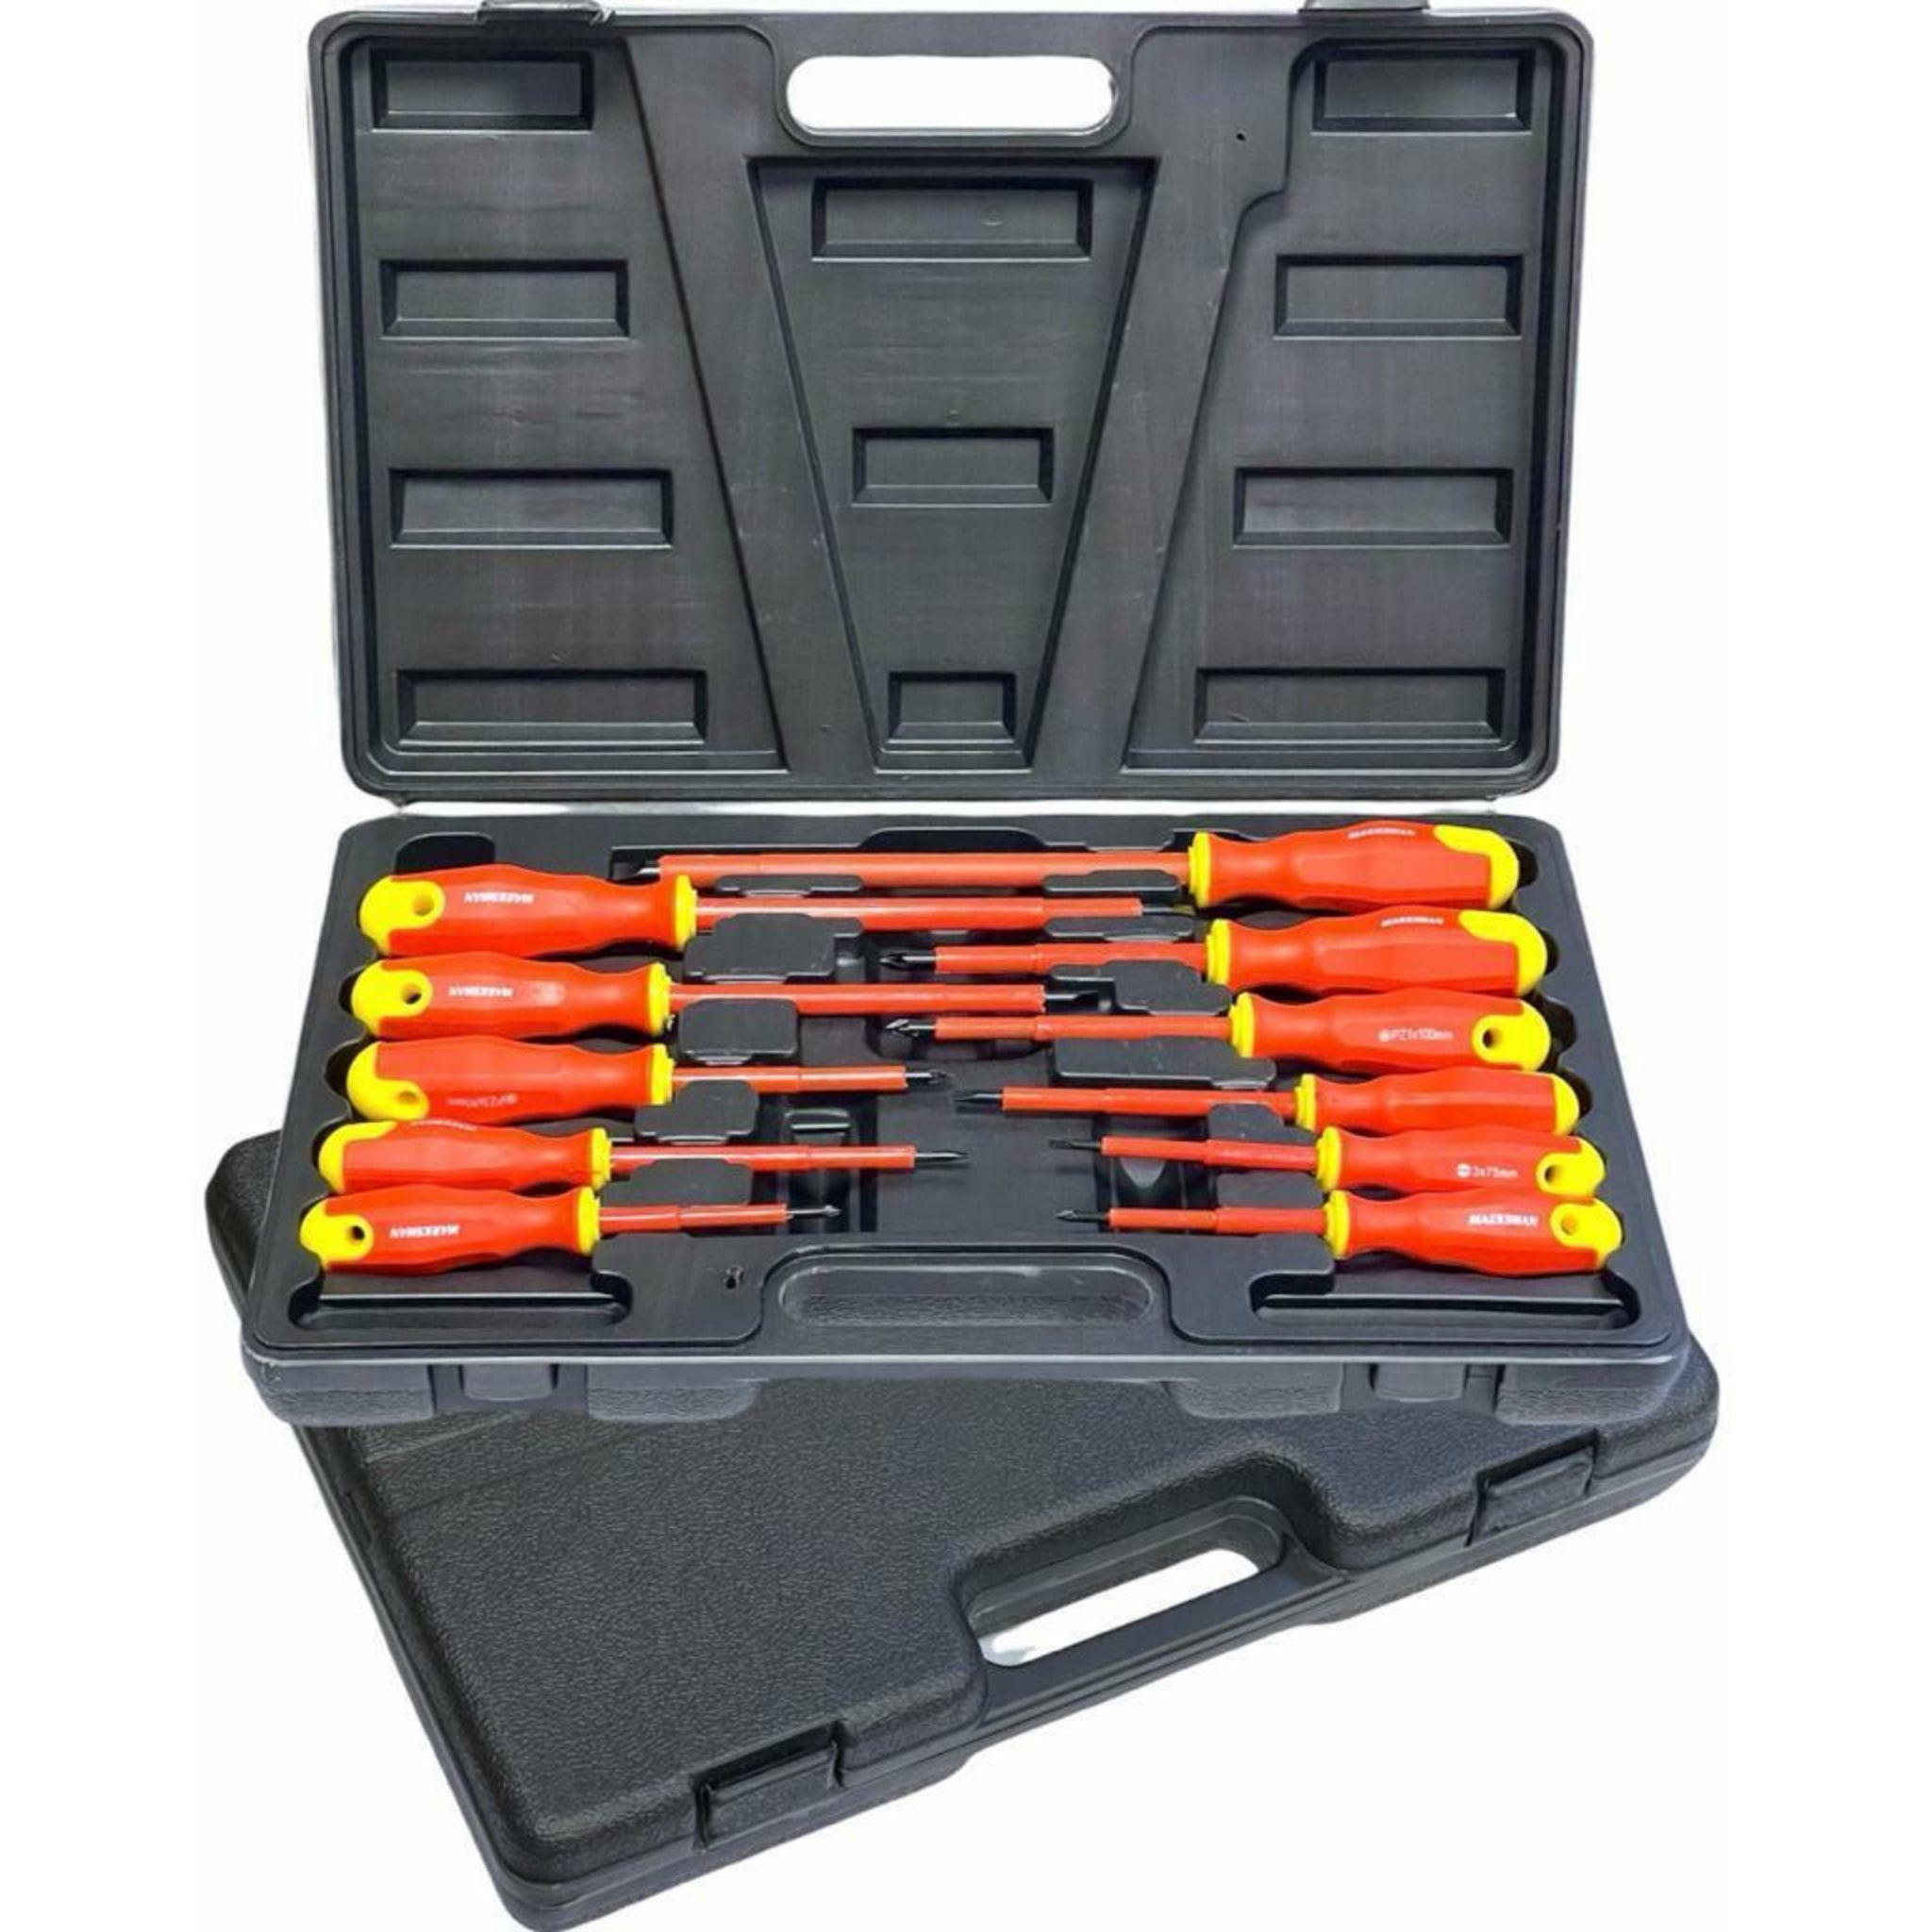 Beclen Harp 11pc Fully Insulated Electrical Screwdriver/Multi Head Screw Tool Set With Kit Case-Perfect Electrician Companion